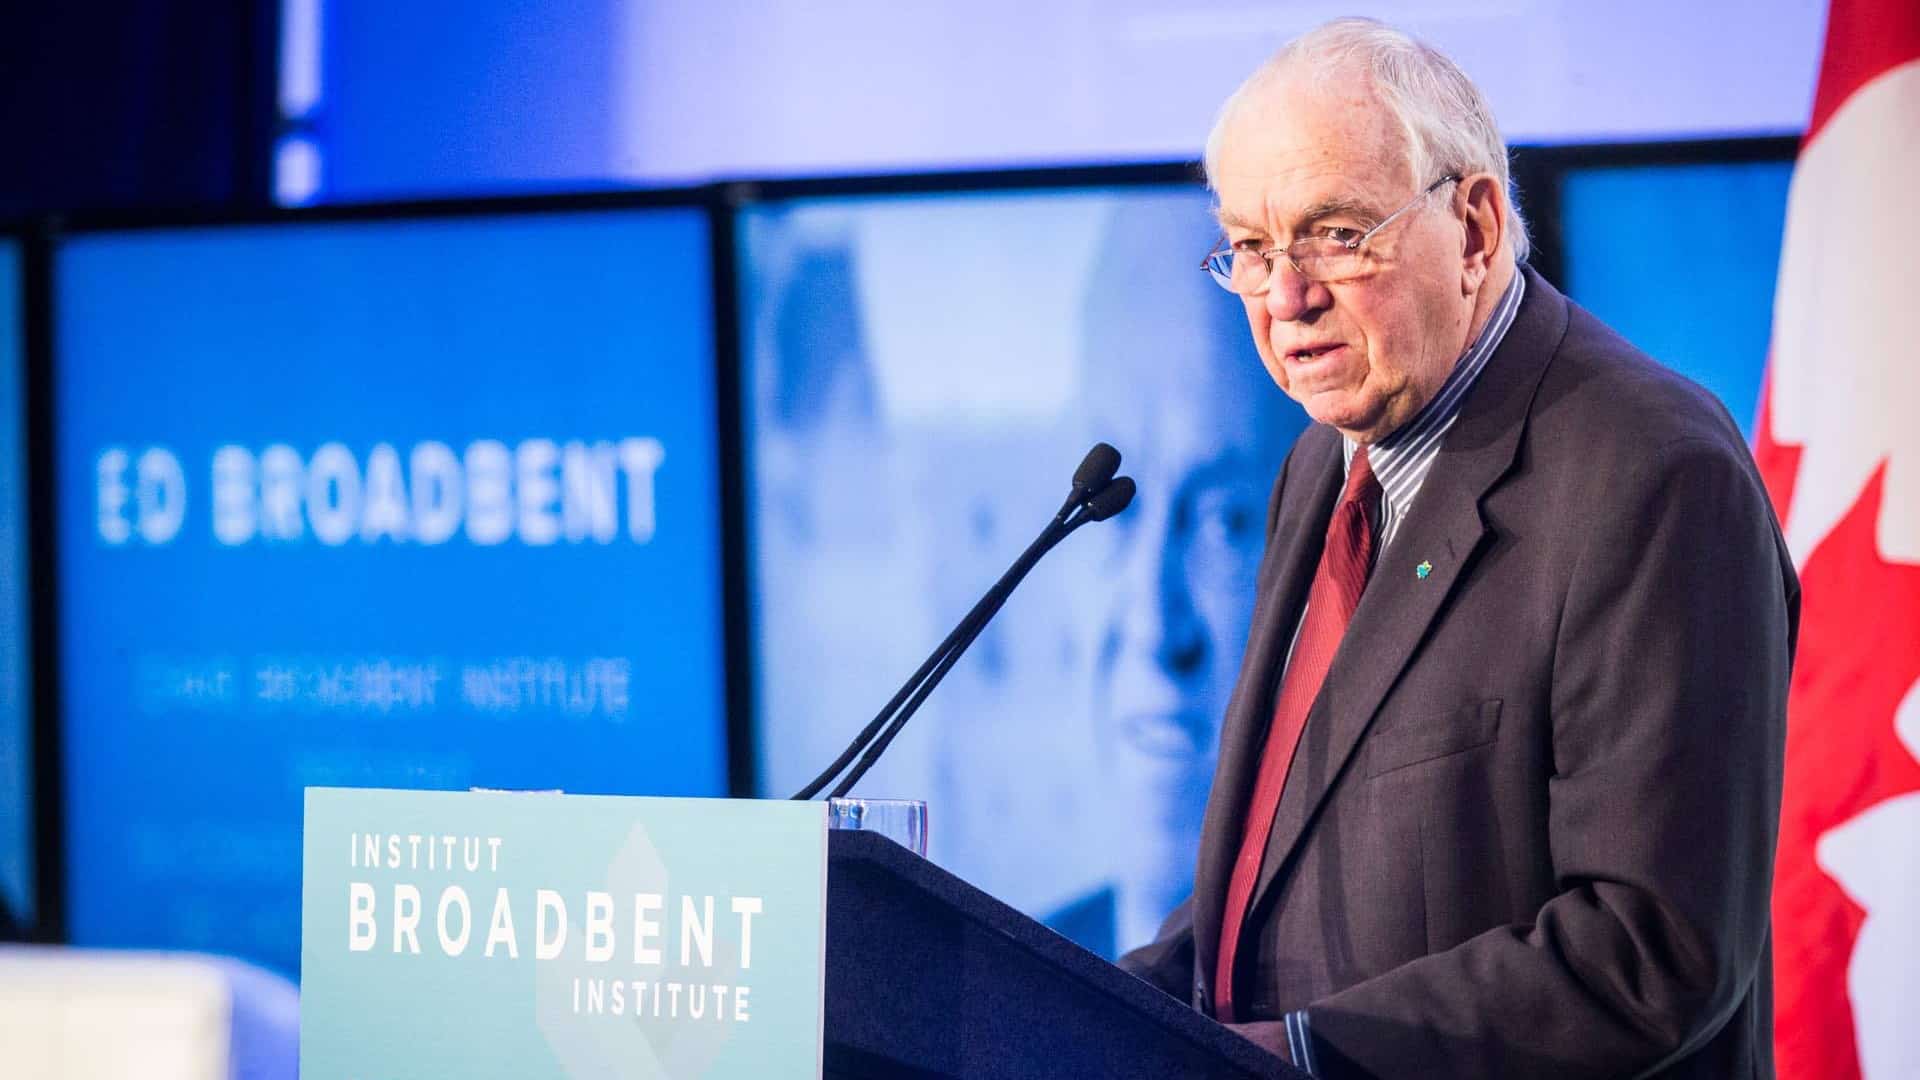 Ed Broadbent: reflections on a mentor and professor